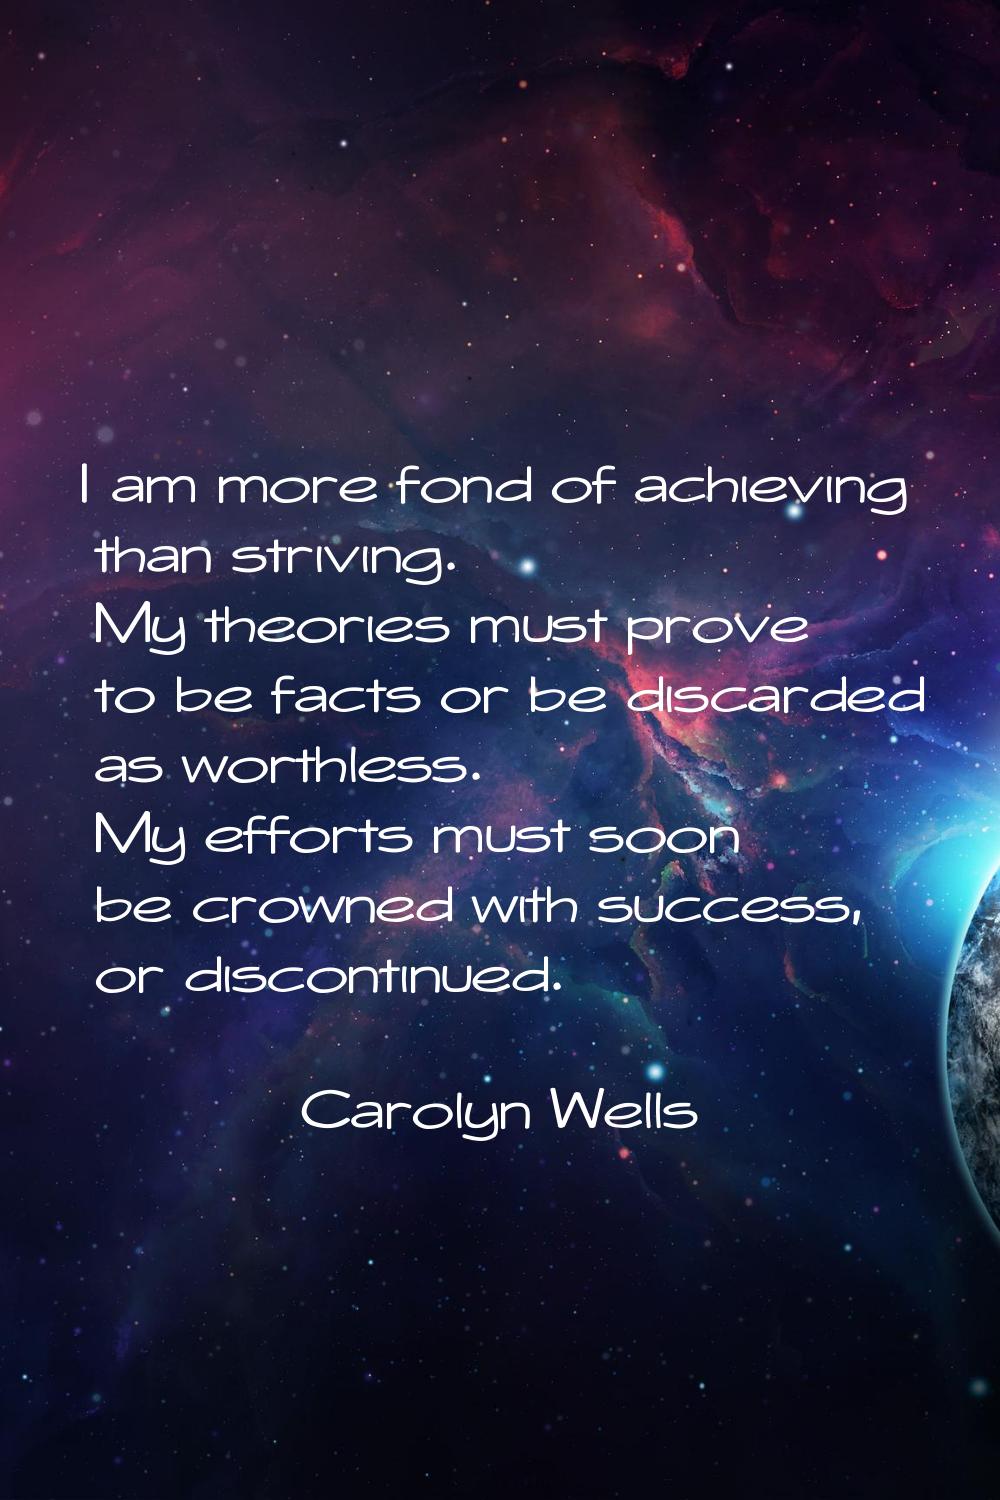 I am more fond of achieving than striving. My theories must prove to be facts or be discarded as wo